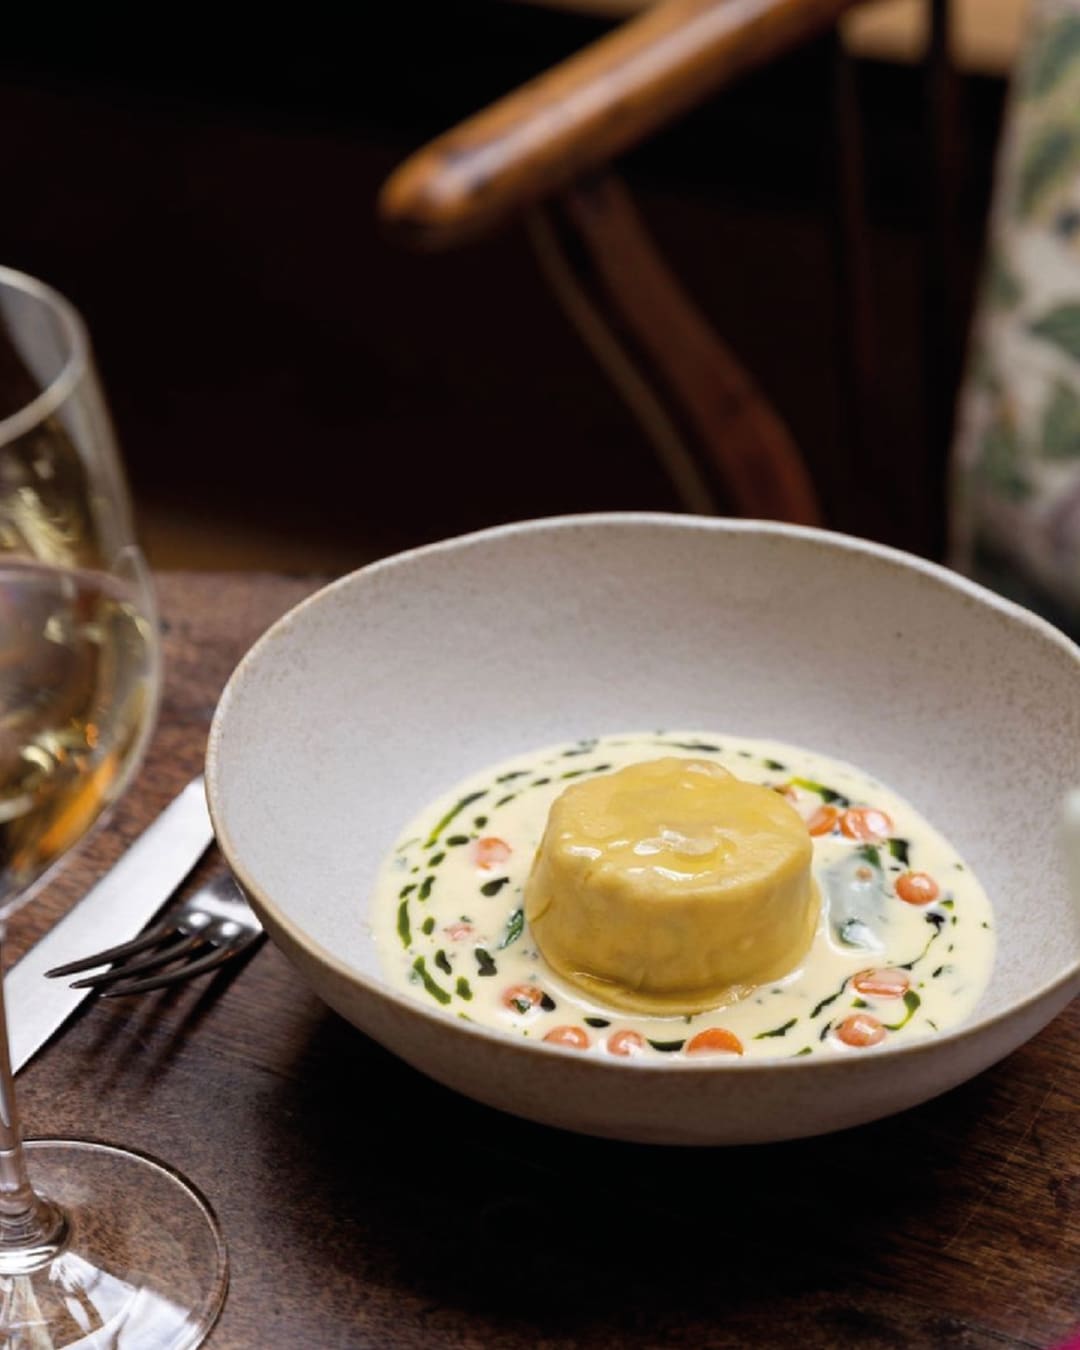 The best farm-to-table restaurants in the UK | Raviolo of confit rabbit with mustard cream and carrot at The Wild Rabbit.